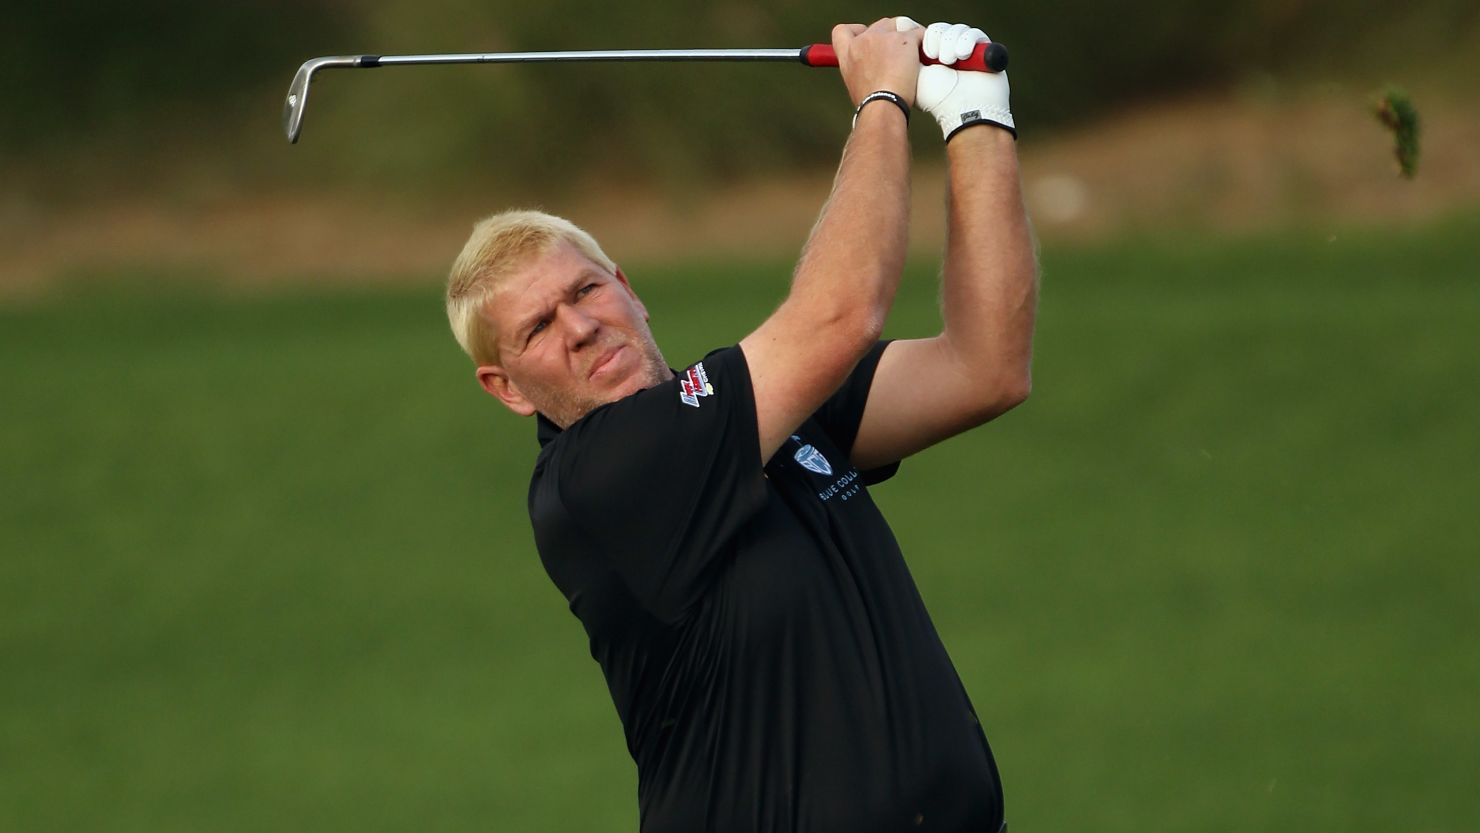 John Daly described conditions on day one of the Qatar Masters as "brutal" after sandstorms raged on the course.